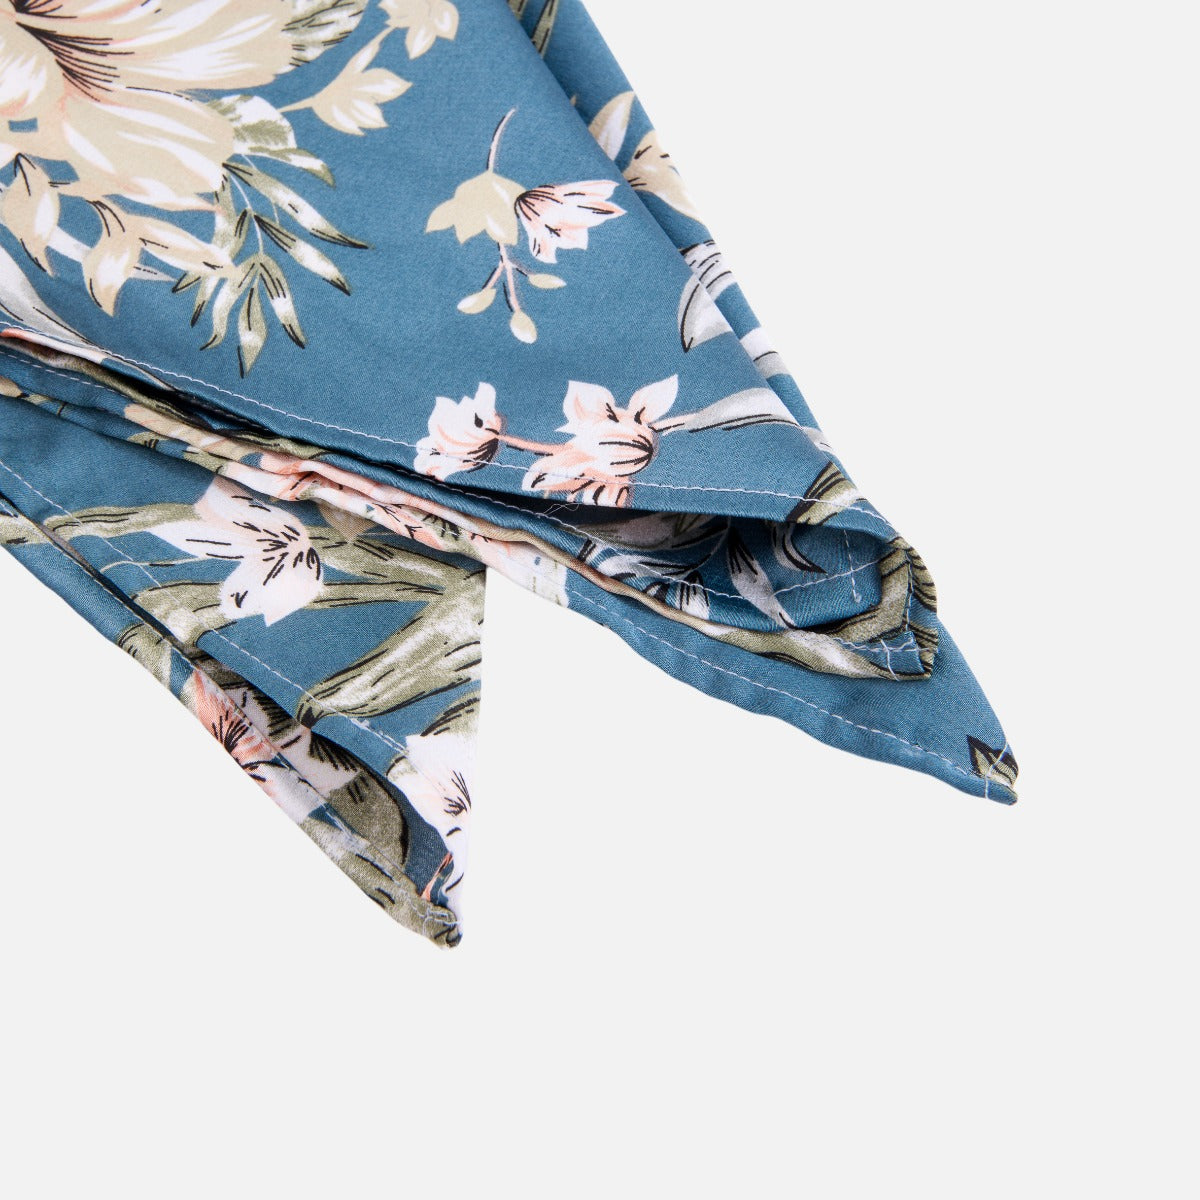 Turquoise satin scarf and floral print